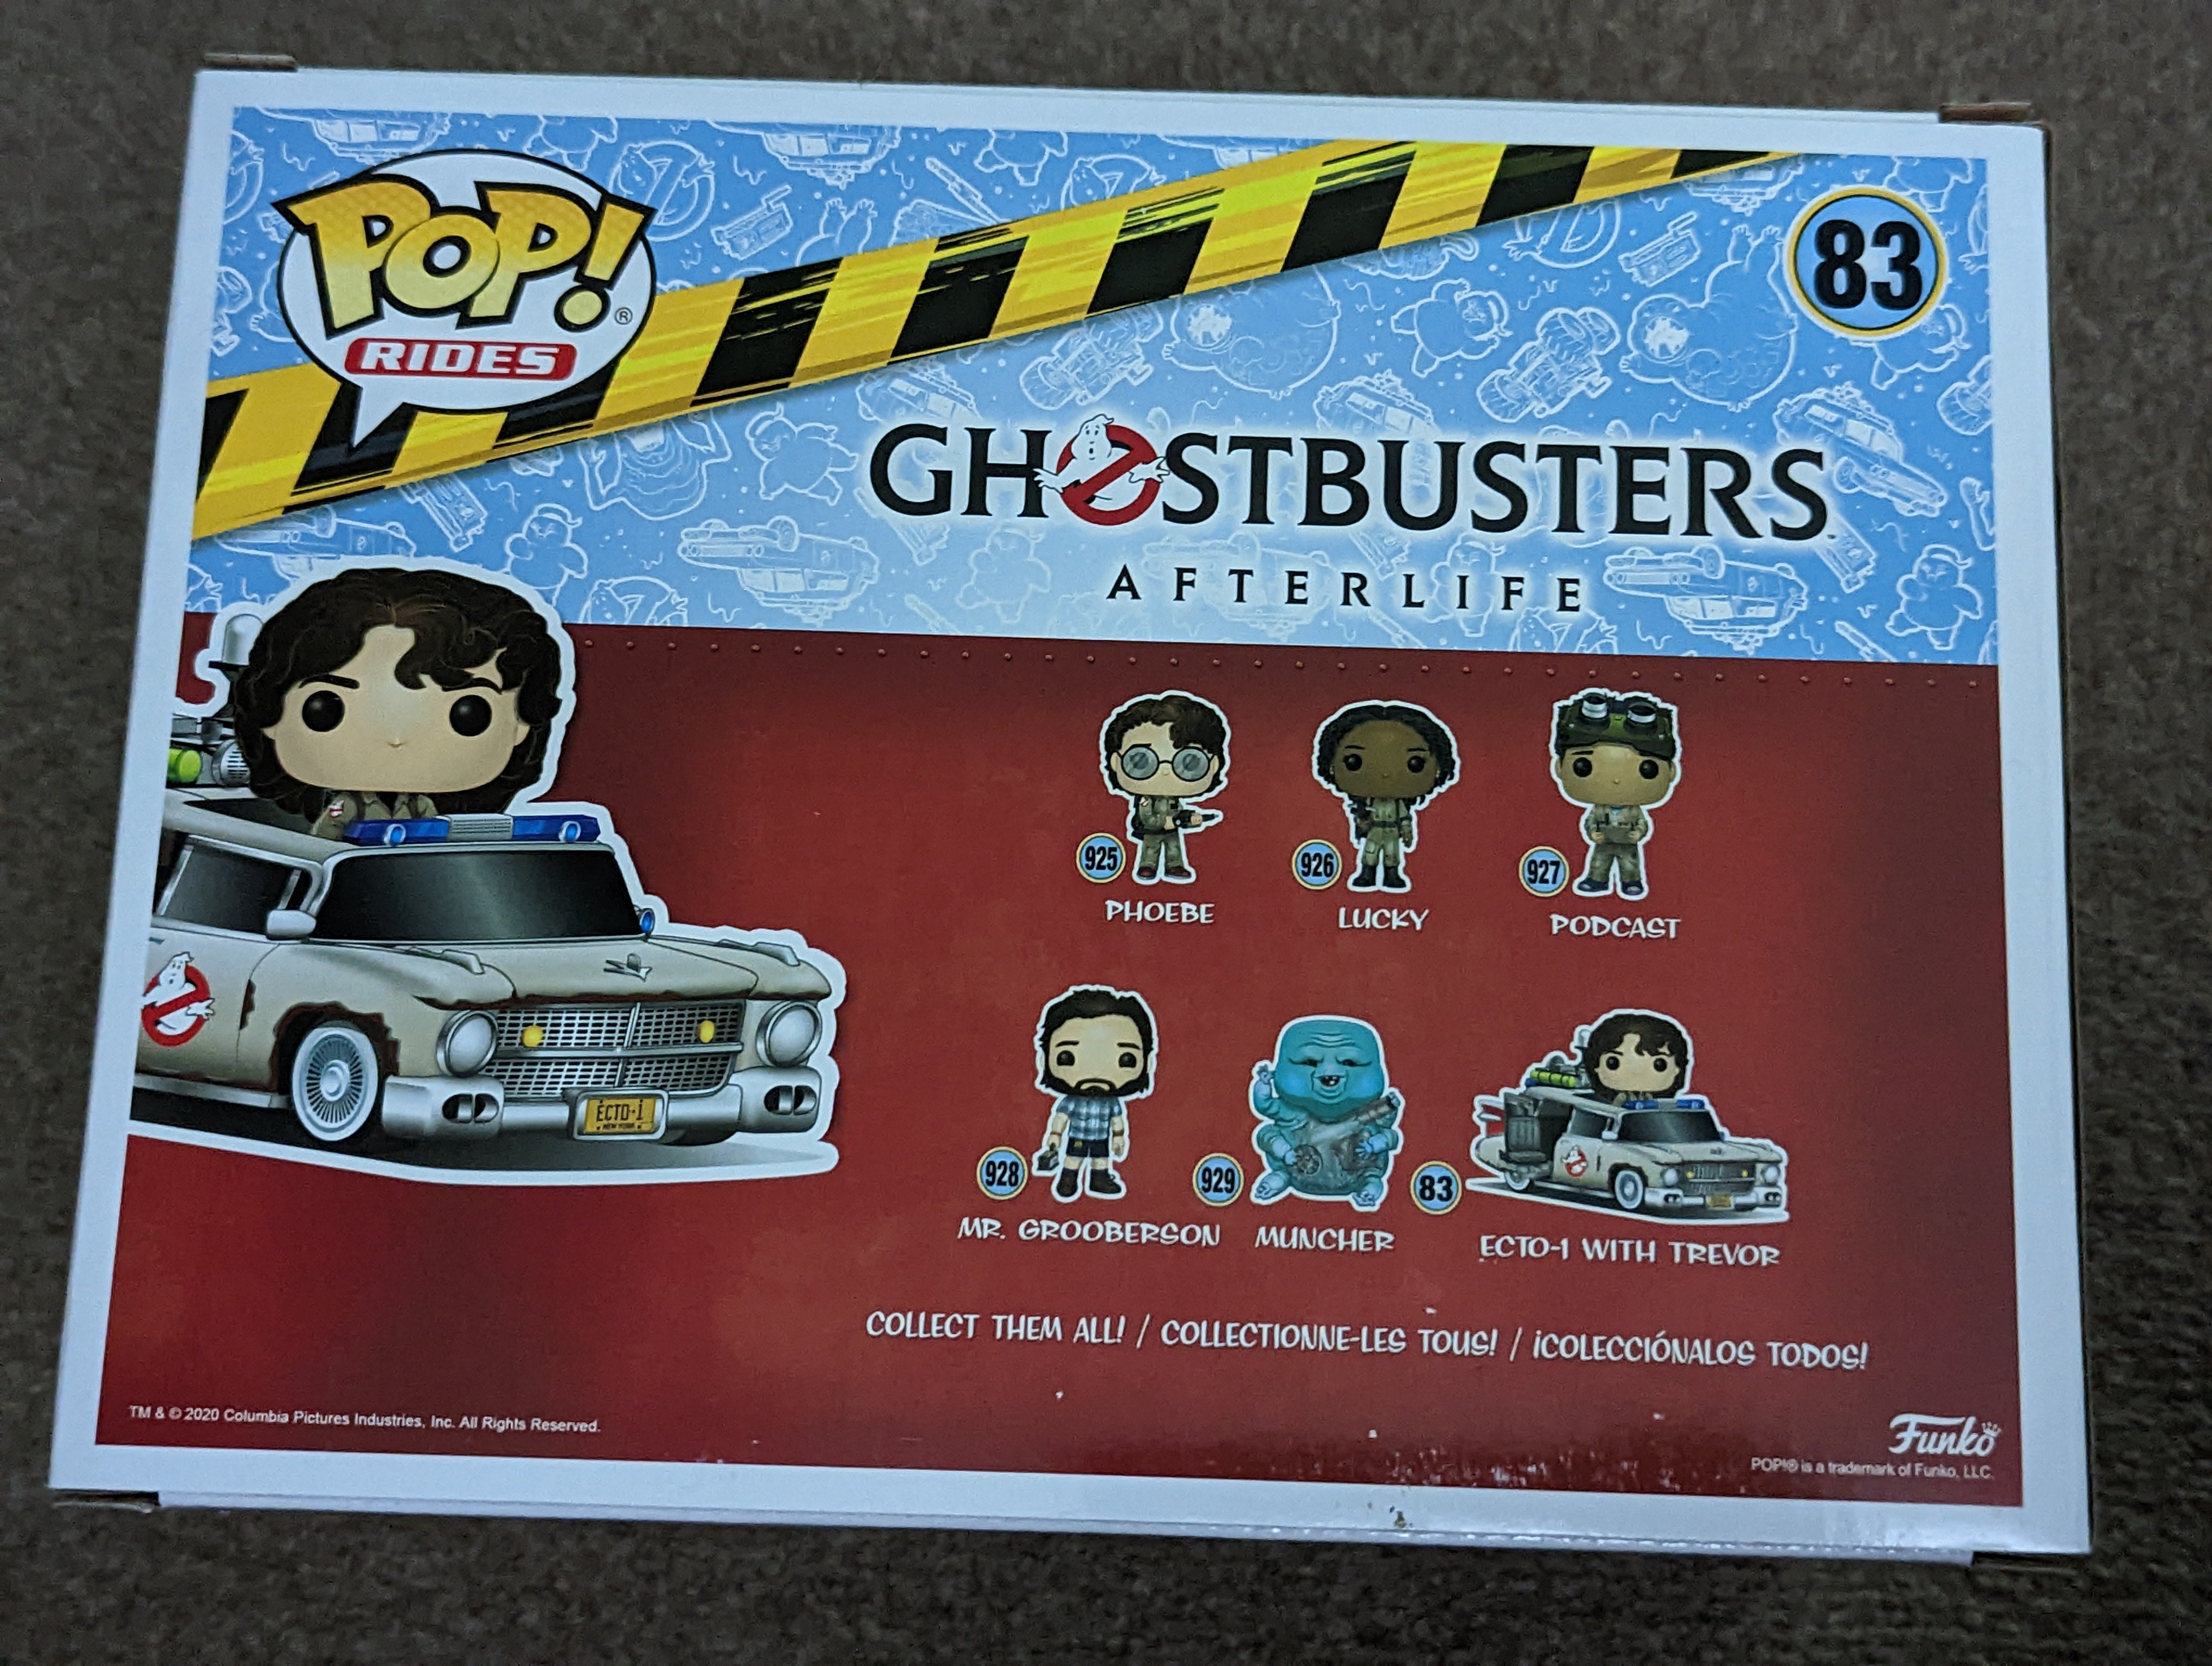 Damaged Box | Funko Pop Rides | Ghostbusters AfterLife | ECTO-1 